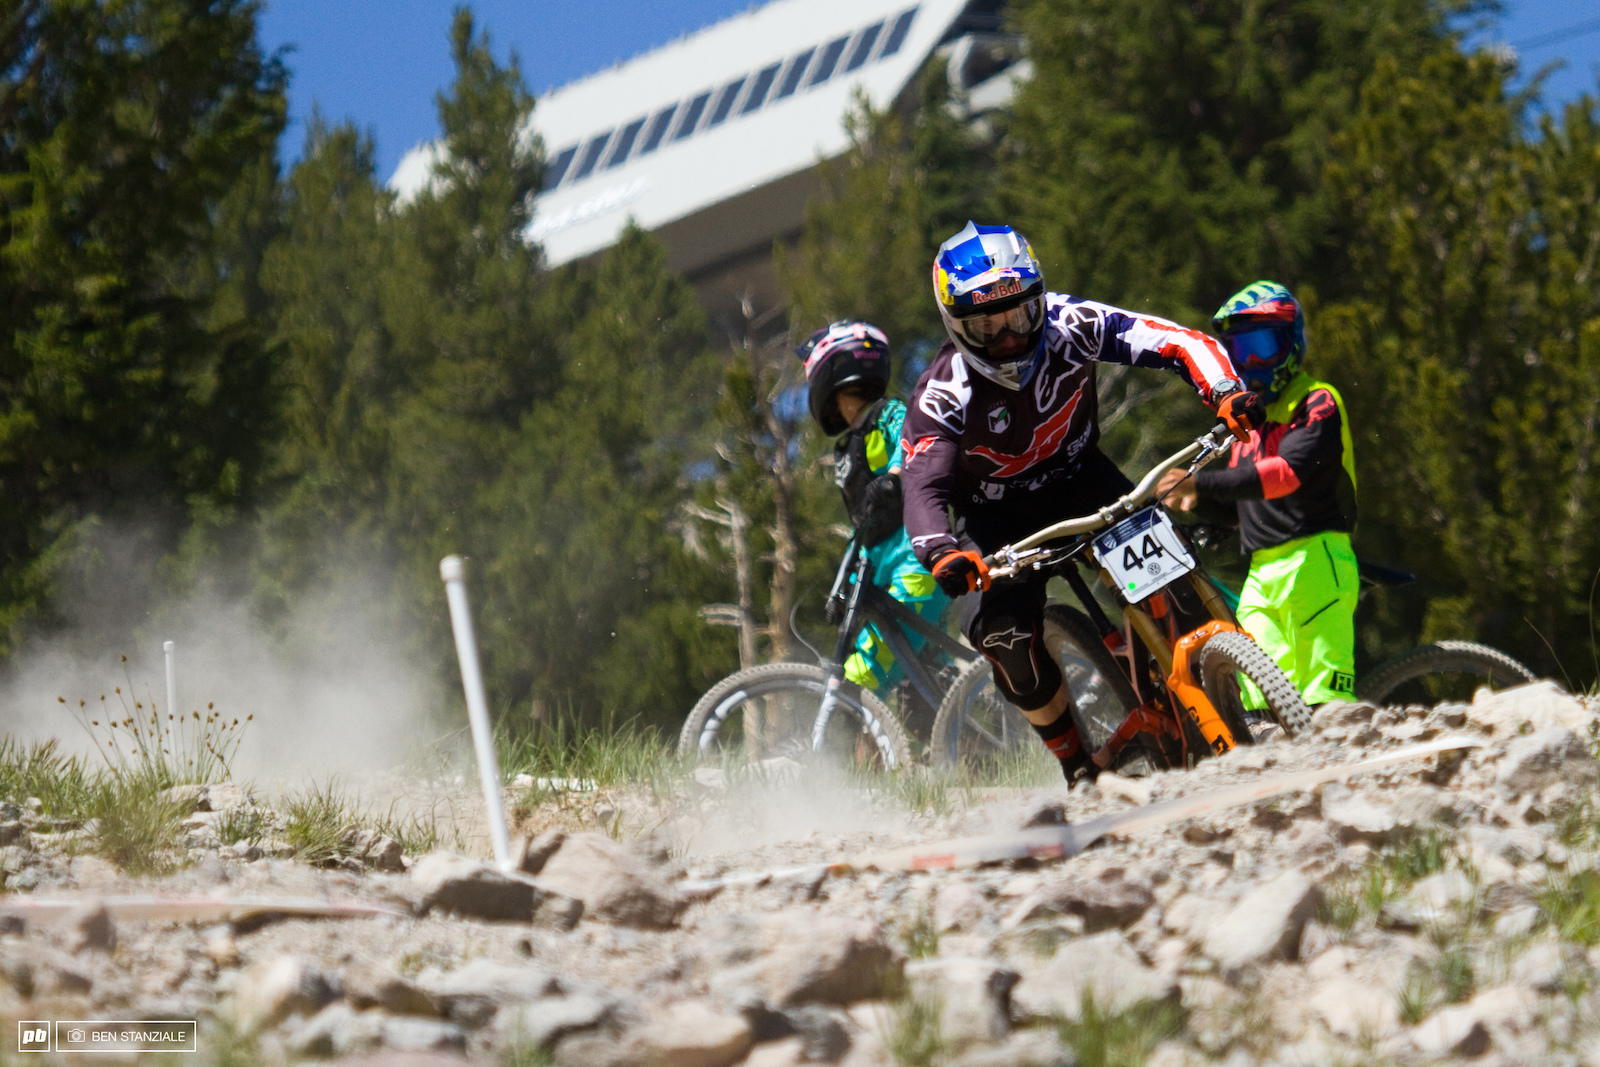 Aaron Gwin in the loose Mammoth pumice rock. No problem for Gwin as he finds 10 seconds over Ropelato and wins Pro Men's Downhill.